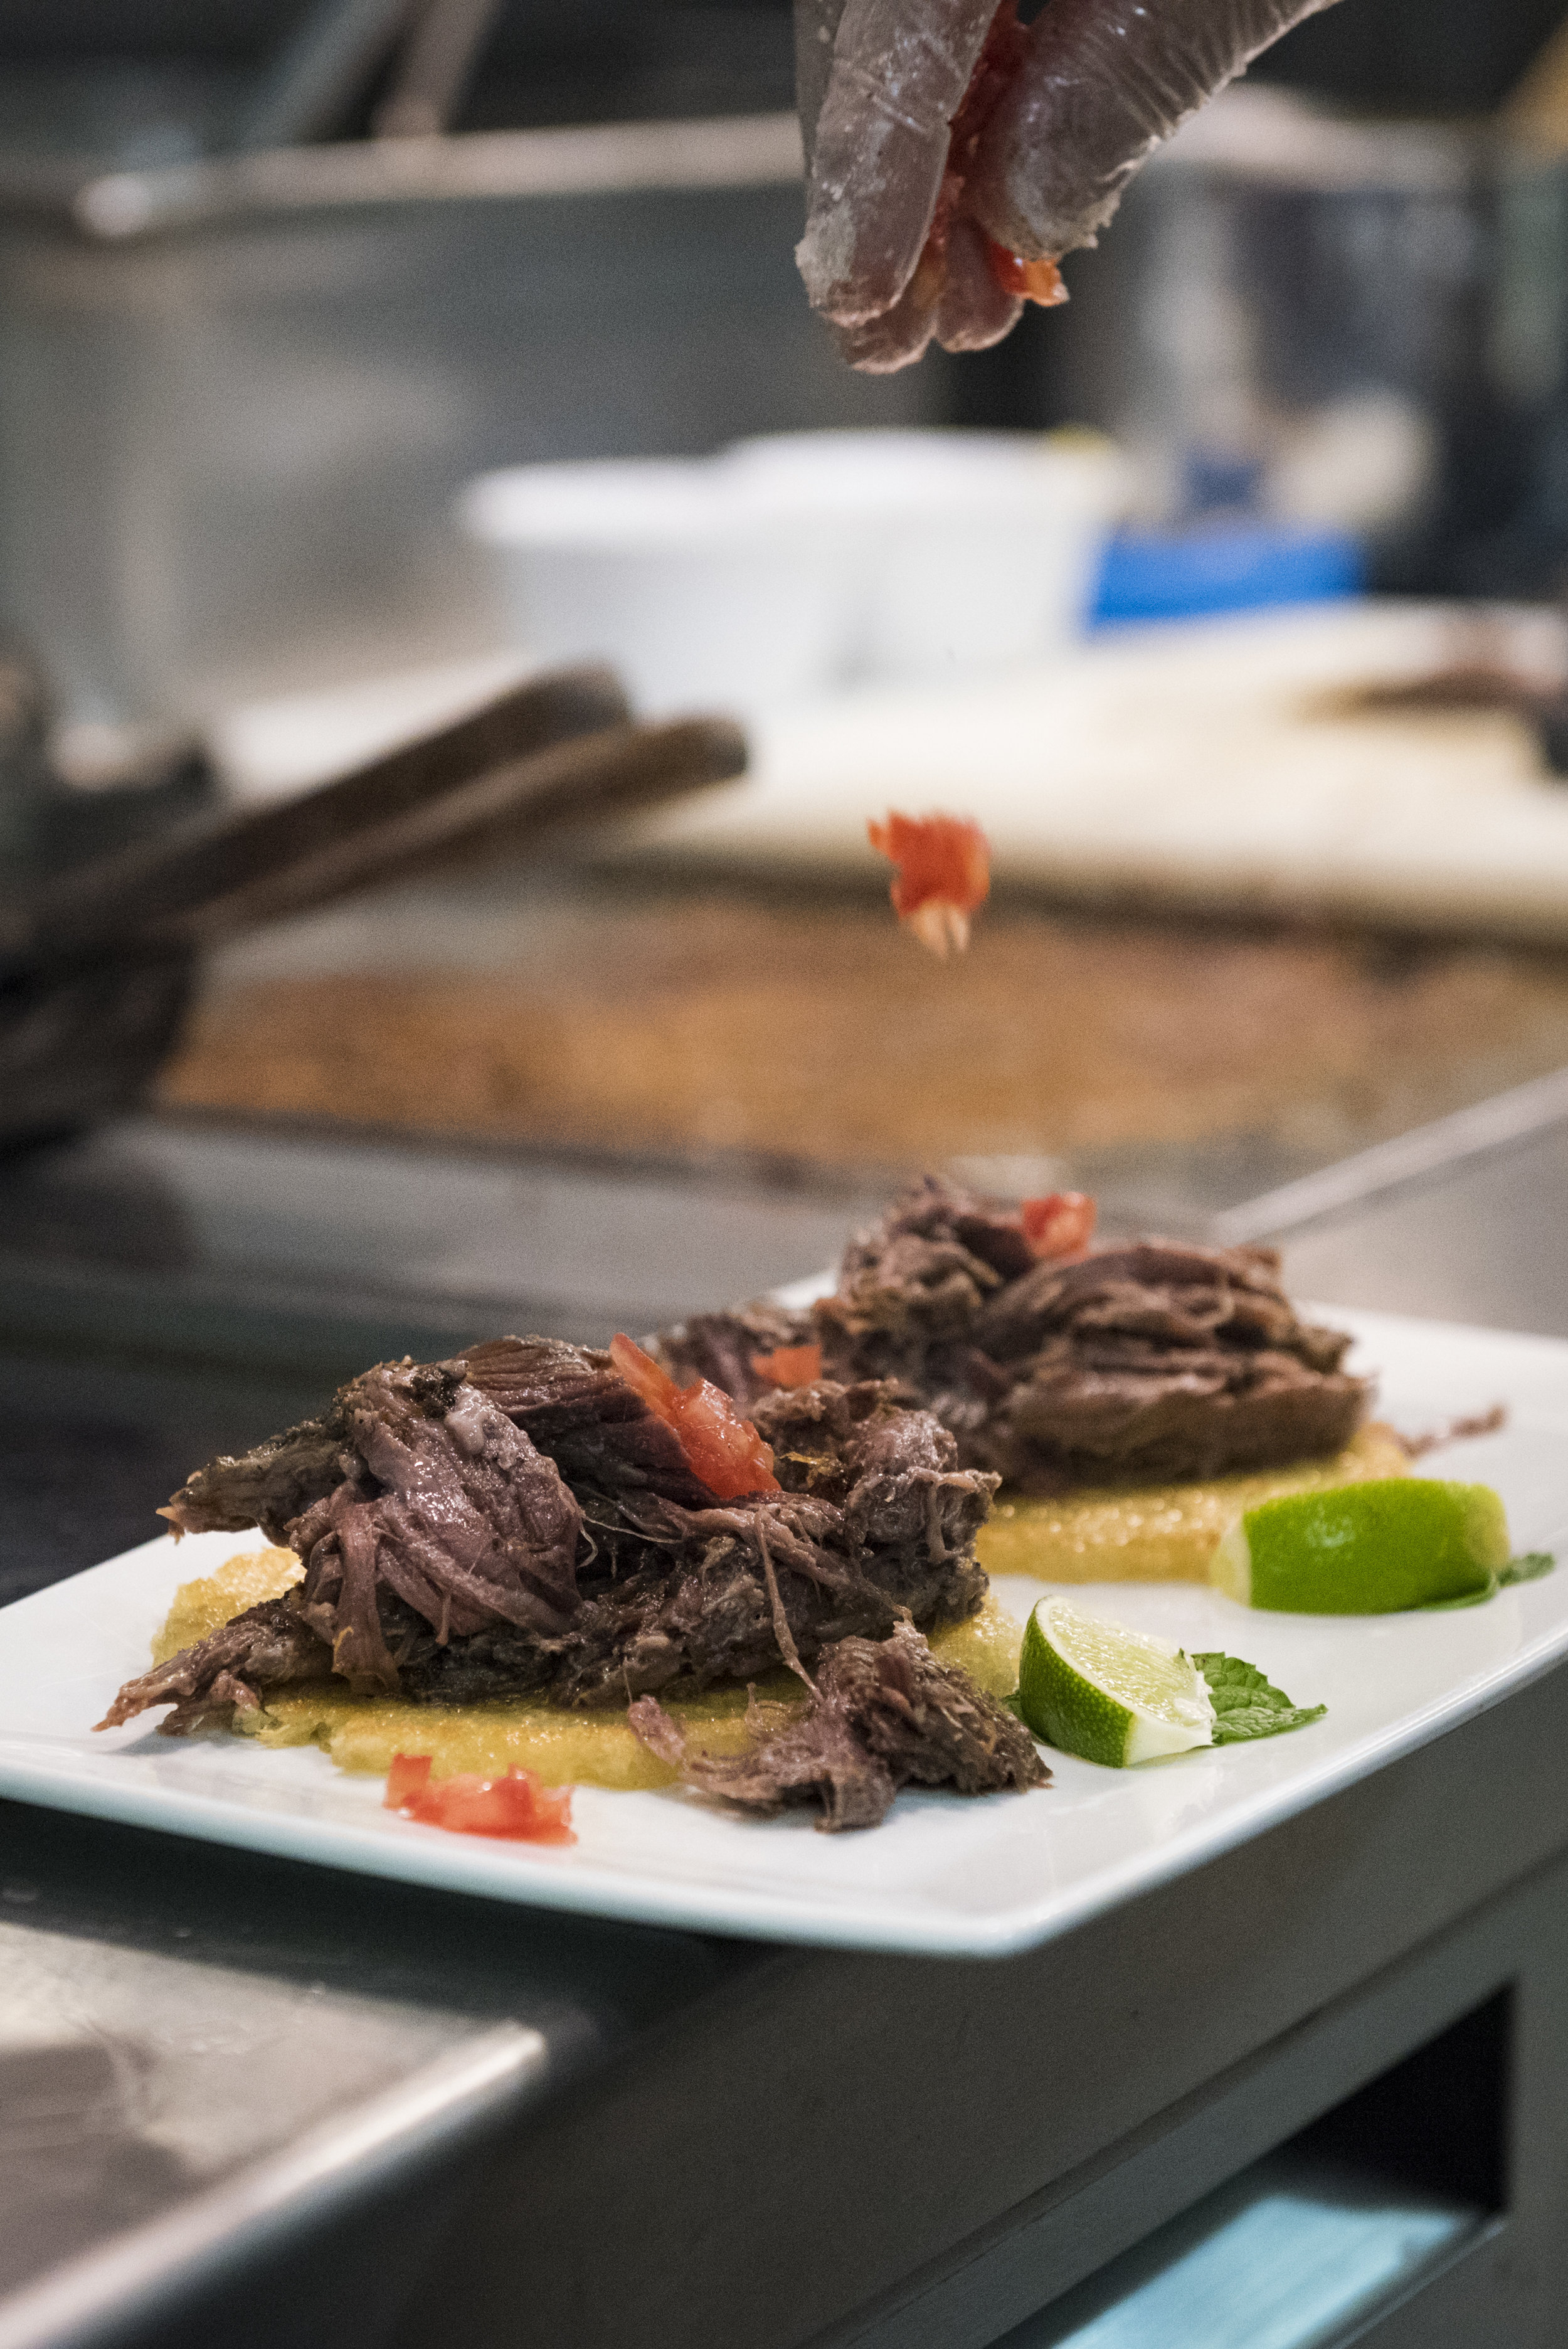  Roberto Copa Matos puts the finishing touches on one of his most famous dishes, 'Copa Vieja a la Americana.' He describes the dish as a "long-forgotten version of Cuba's signature dish, ropa vieja: NC grass-fed beef, slow-cooked with wine, mint, and